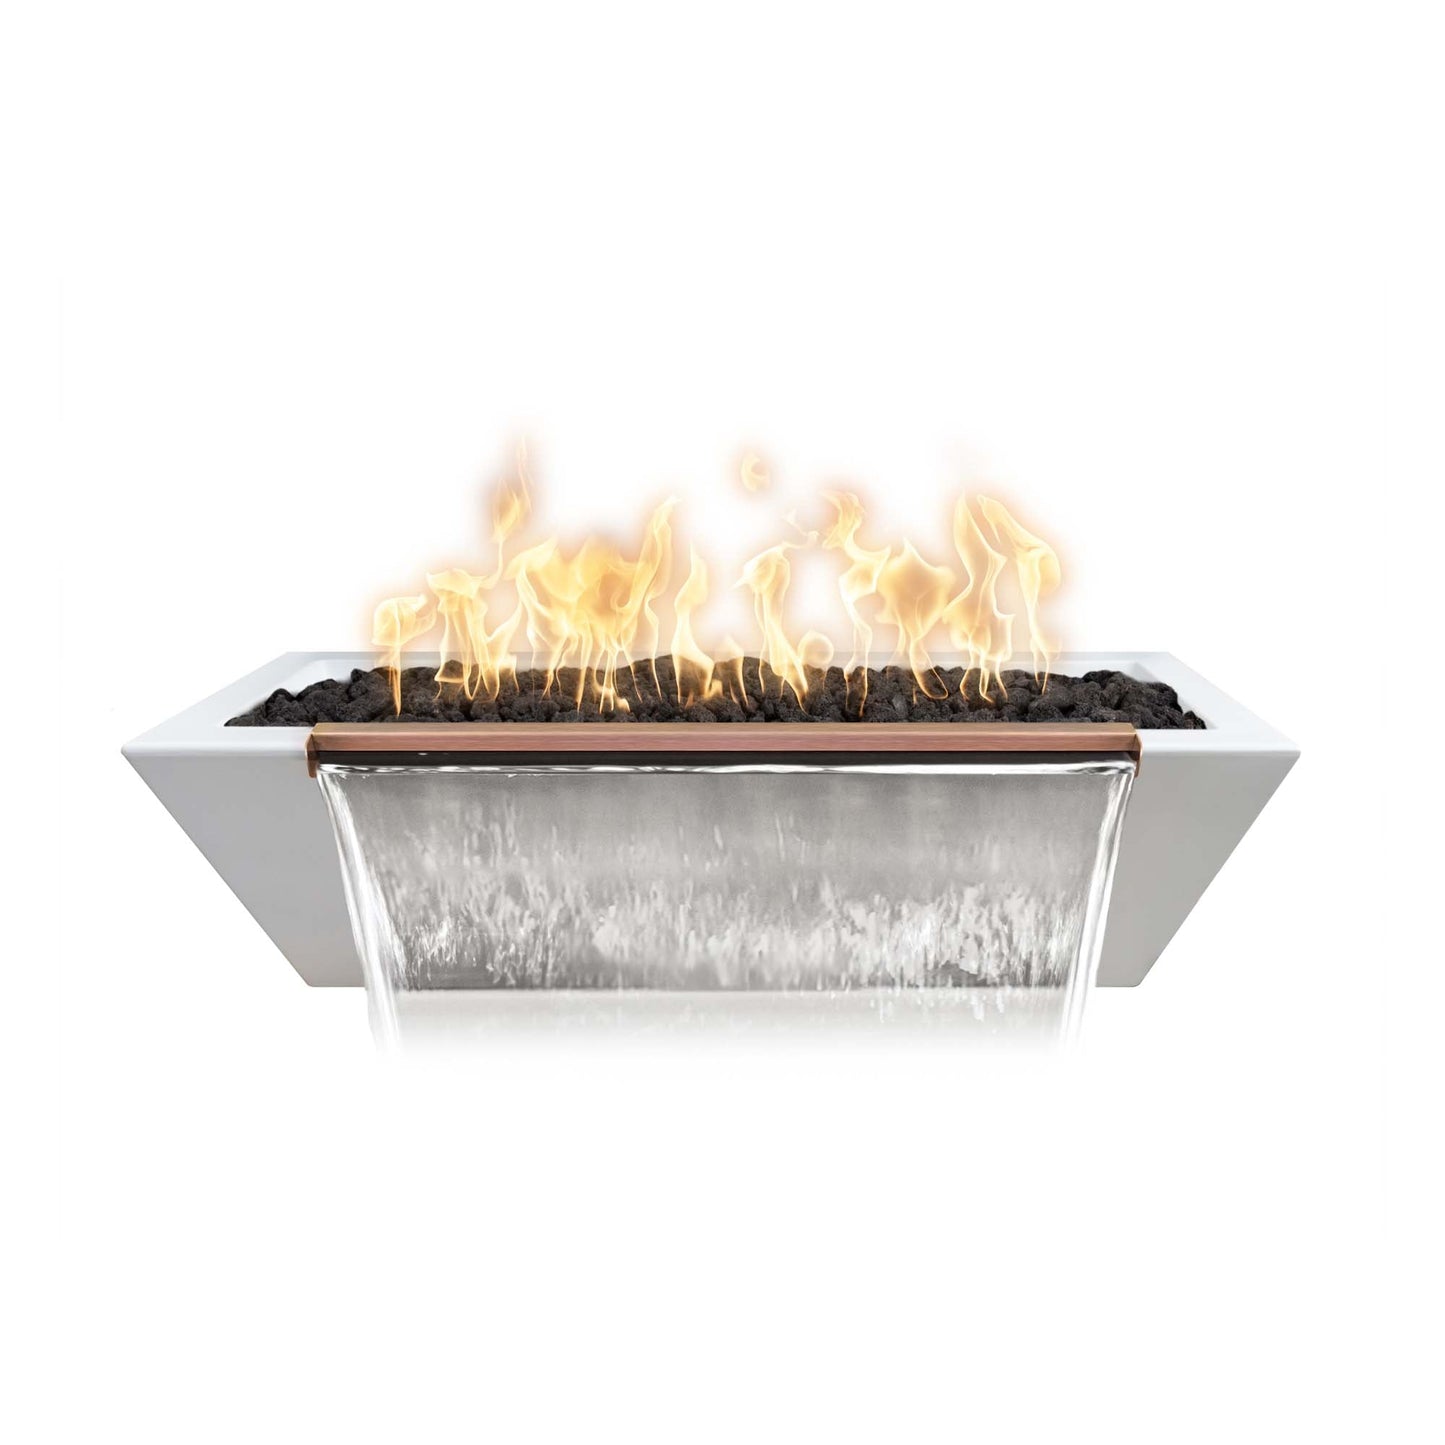 The Outdoor Plus Linear Maya 72" Chestnut GFRC Concrete Liquid Propane Fire & Water Bowl with Match Lit with Flame Sense Ignition